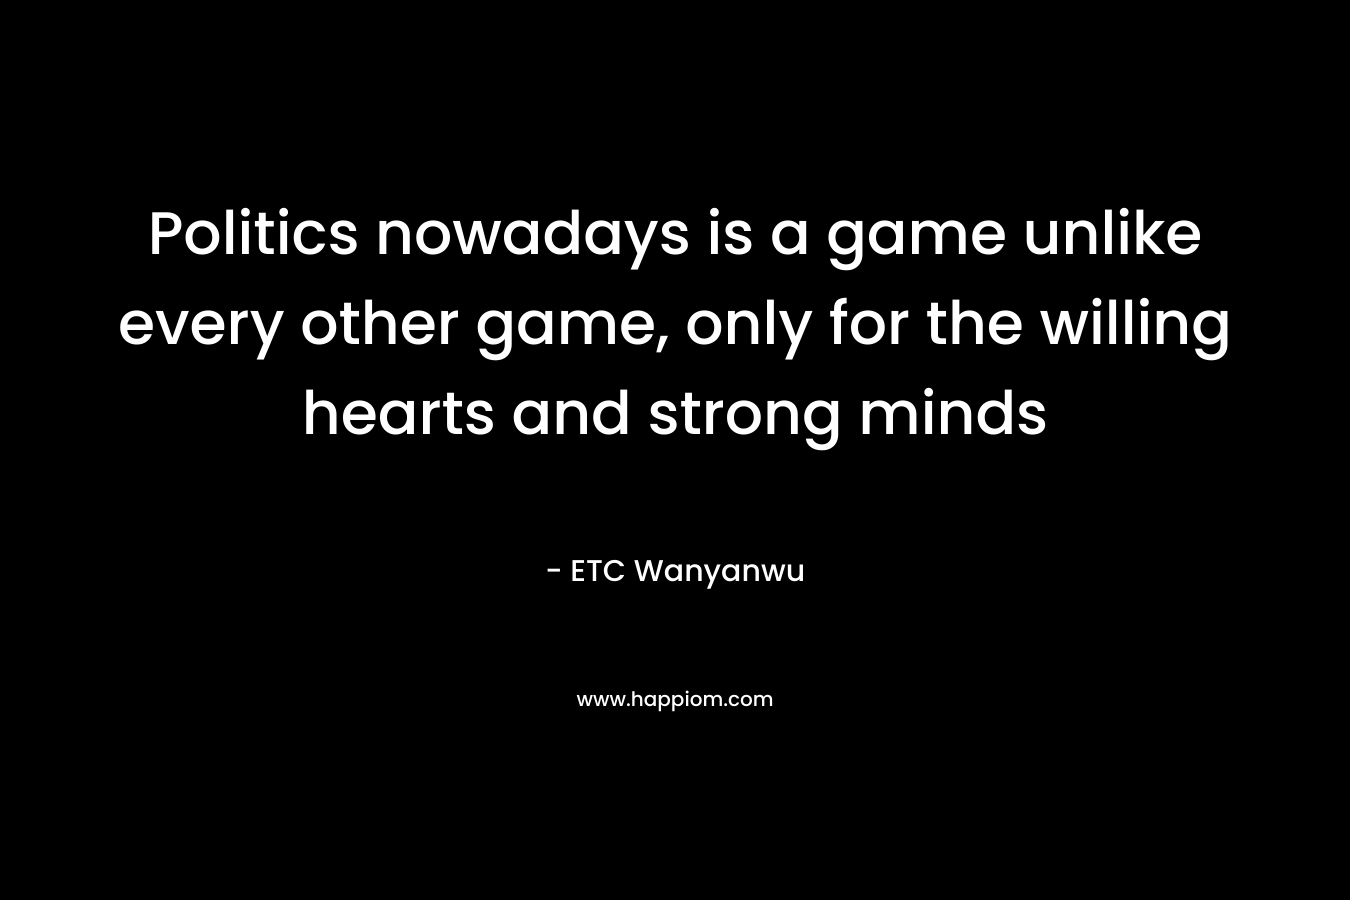 Politics nowadays is a game unlike every other game, only for the willing hearts and strong minds – ETC Wanyanwu